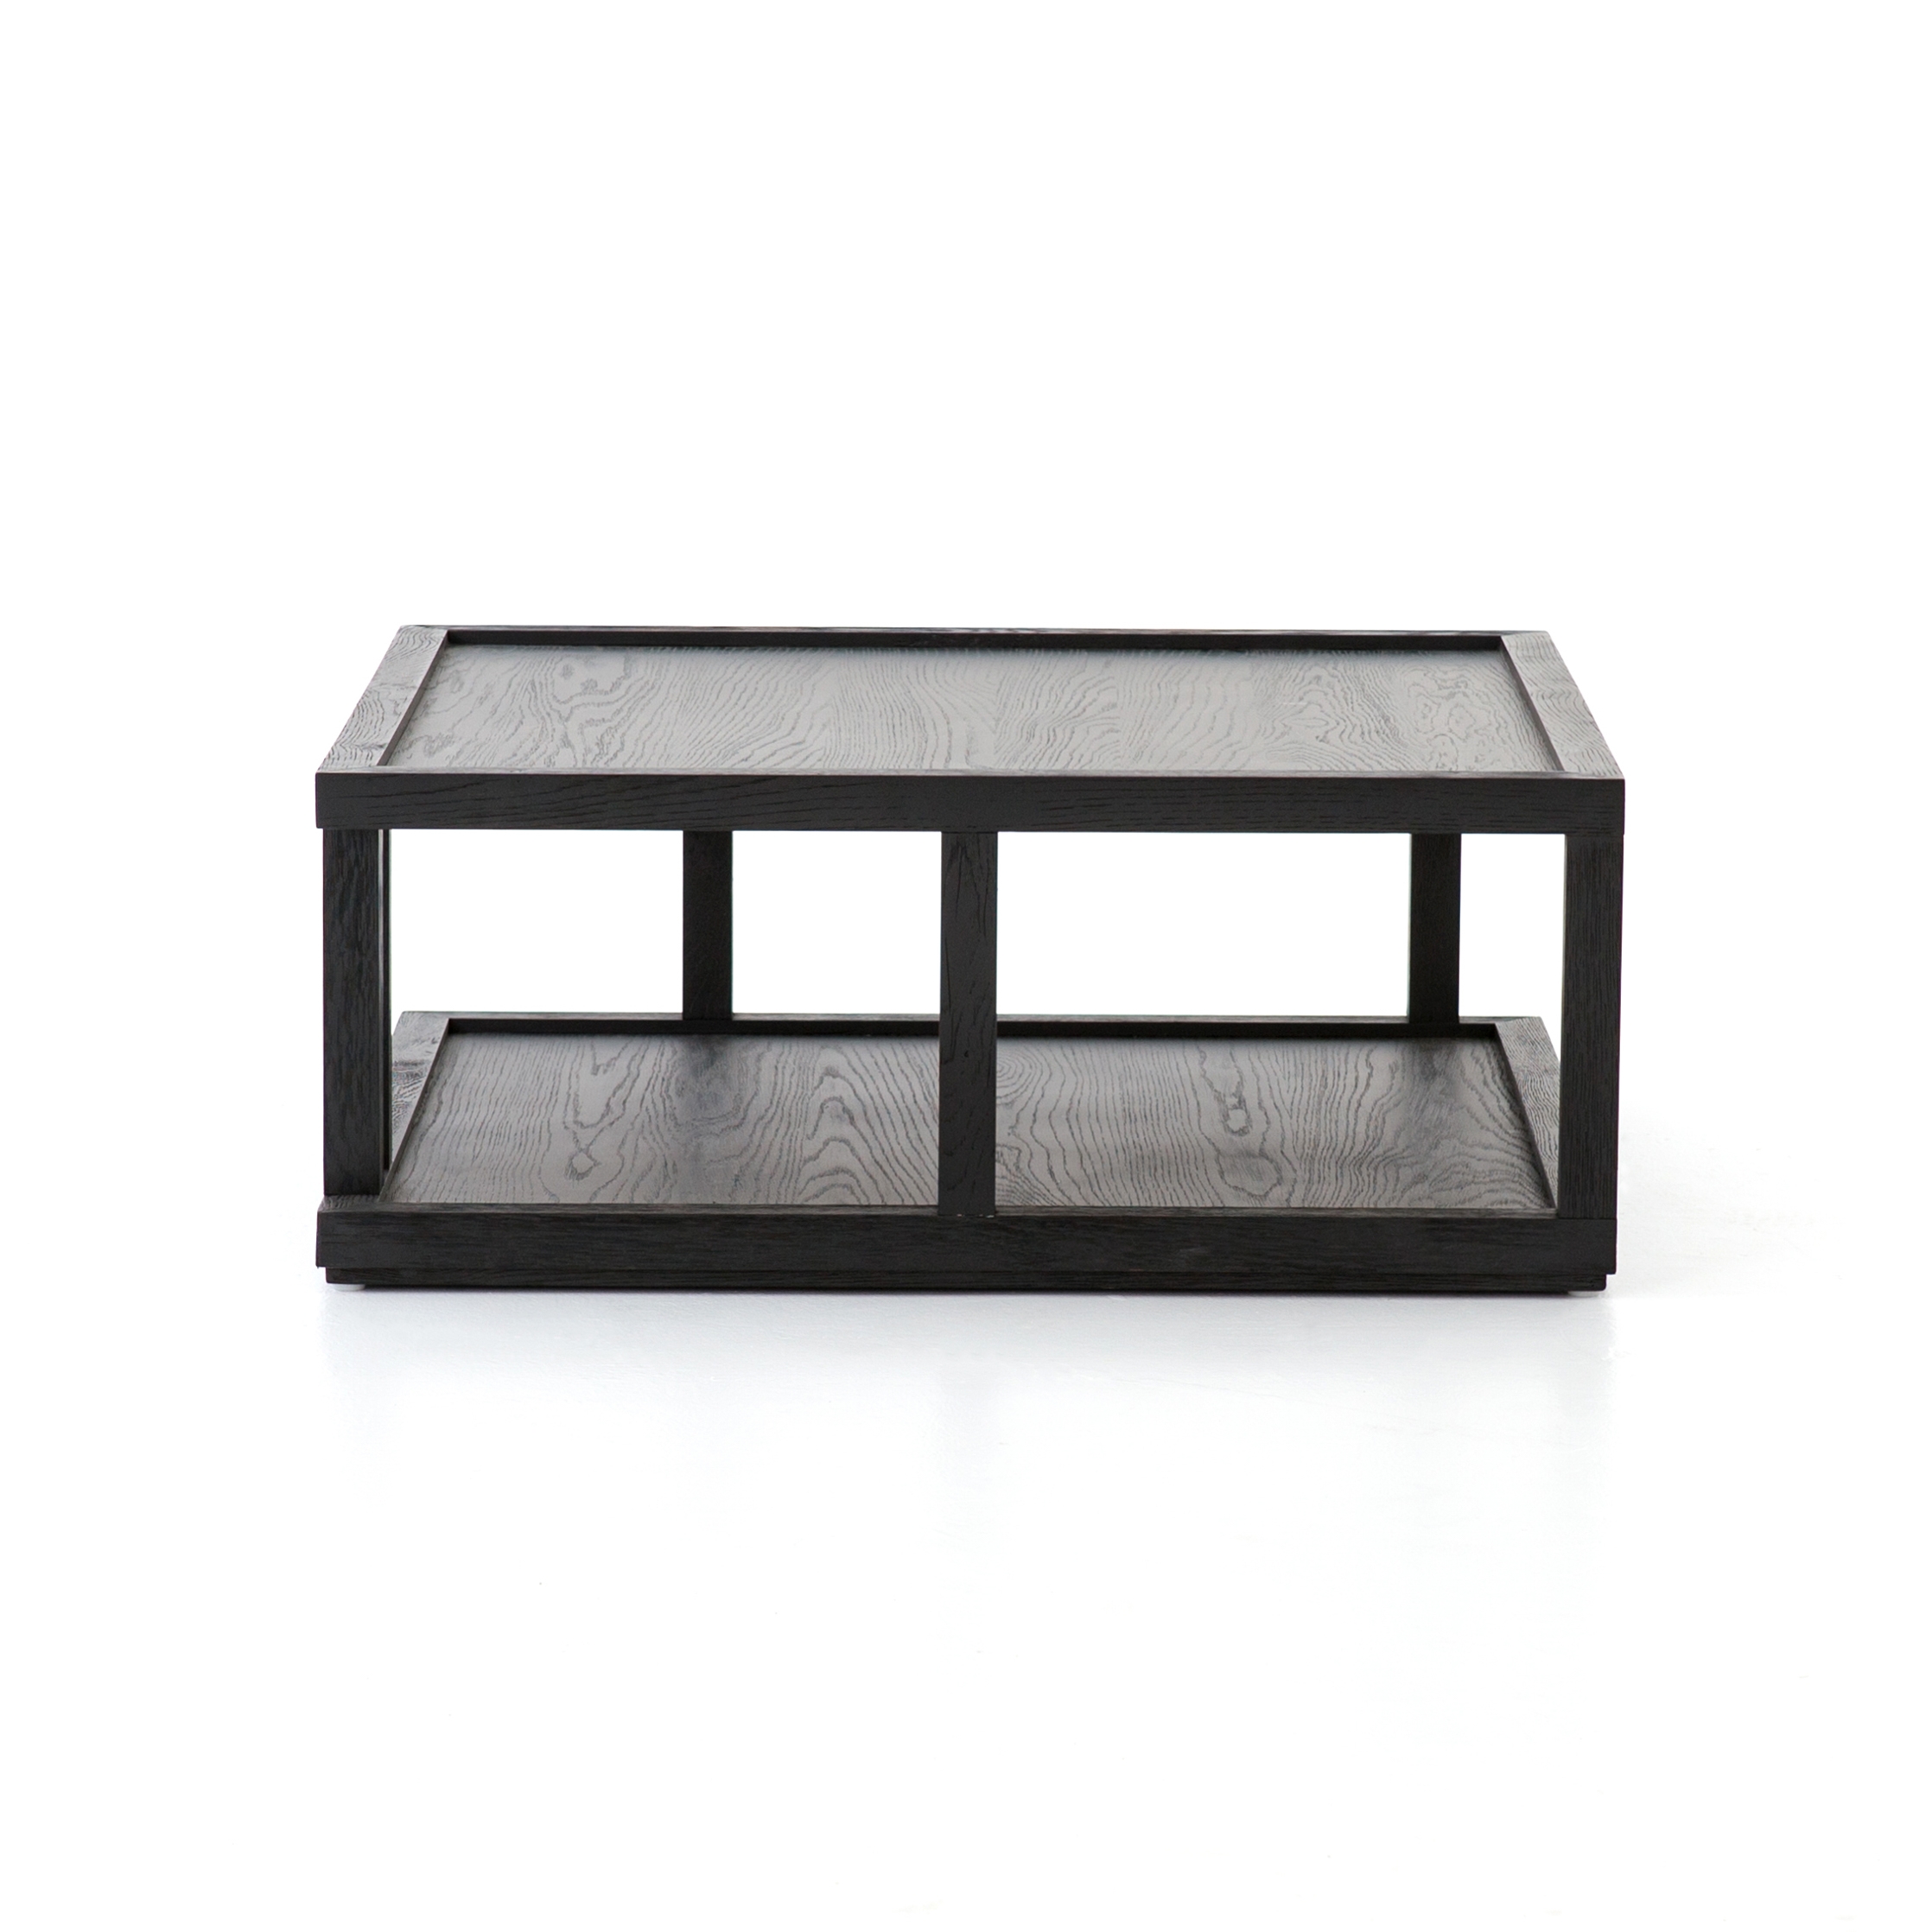 Charley Coffee Table-Drifted Black - Image 5